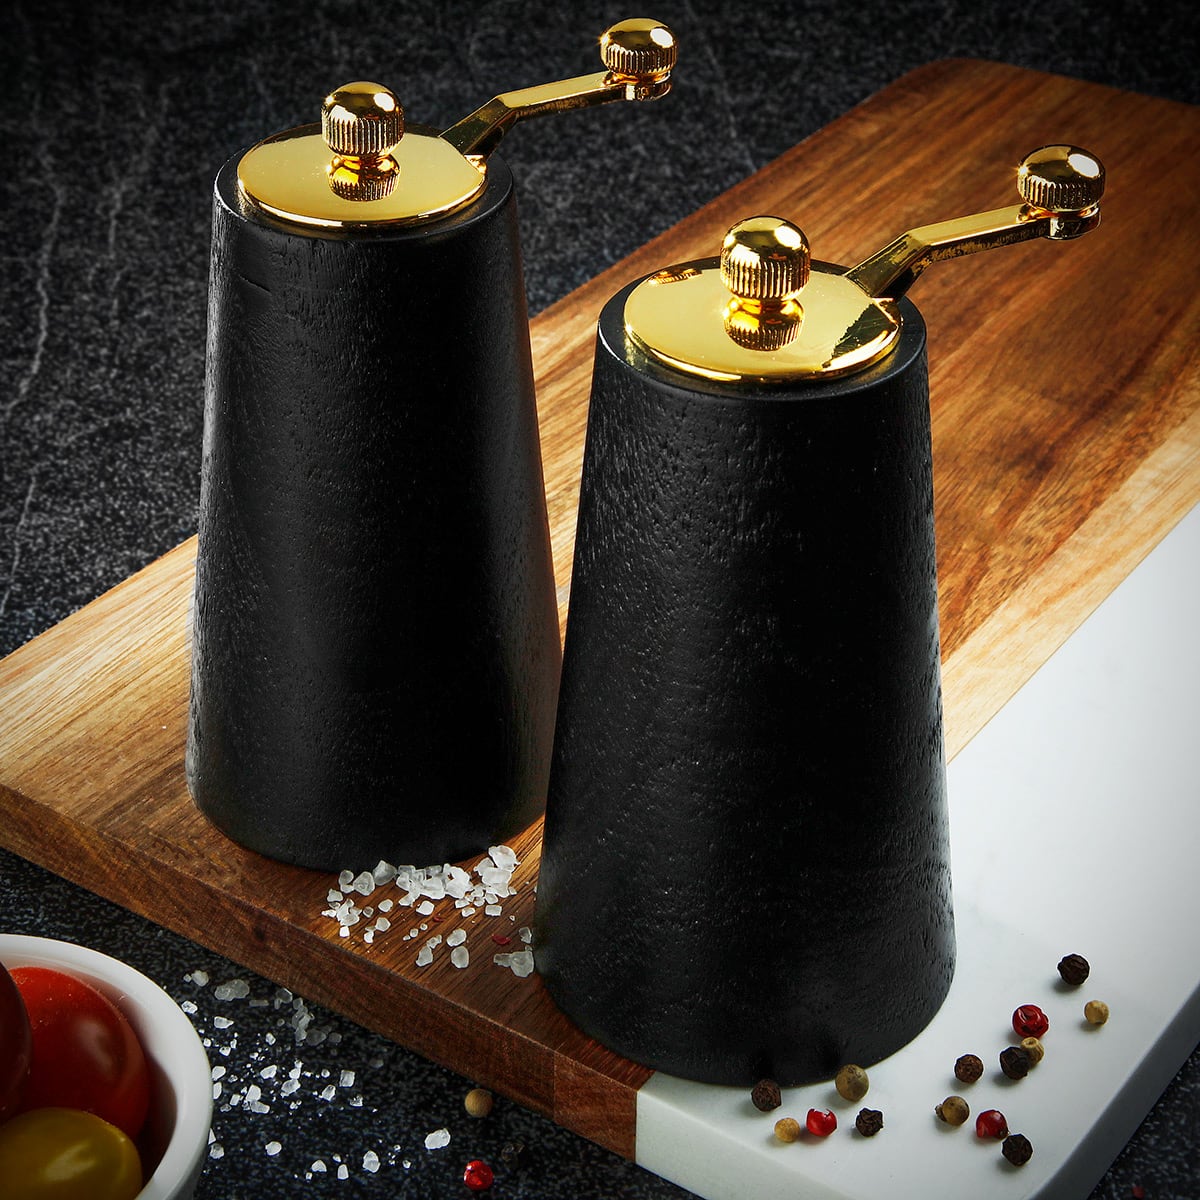 Richfield Wooden Salt and Pepper Grinders, Black with Gold Accents 